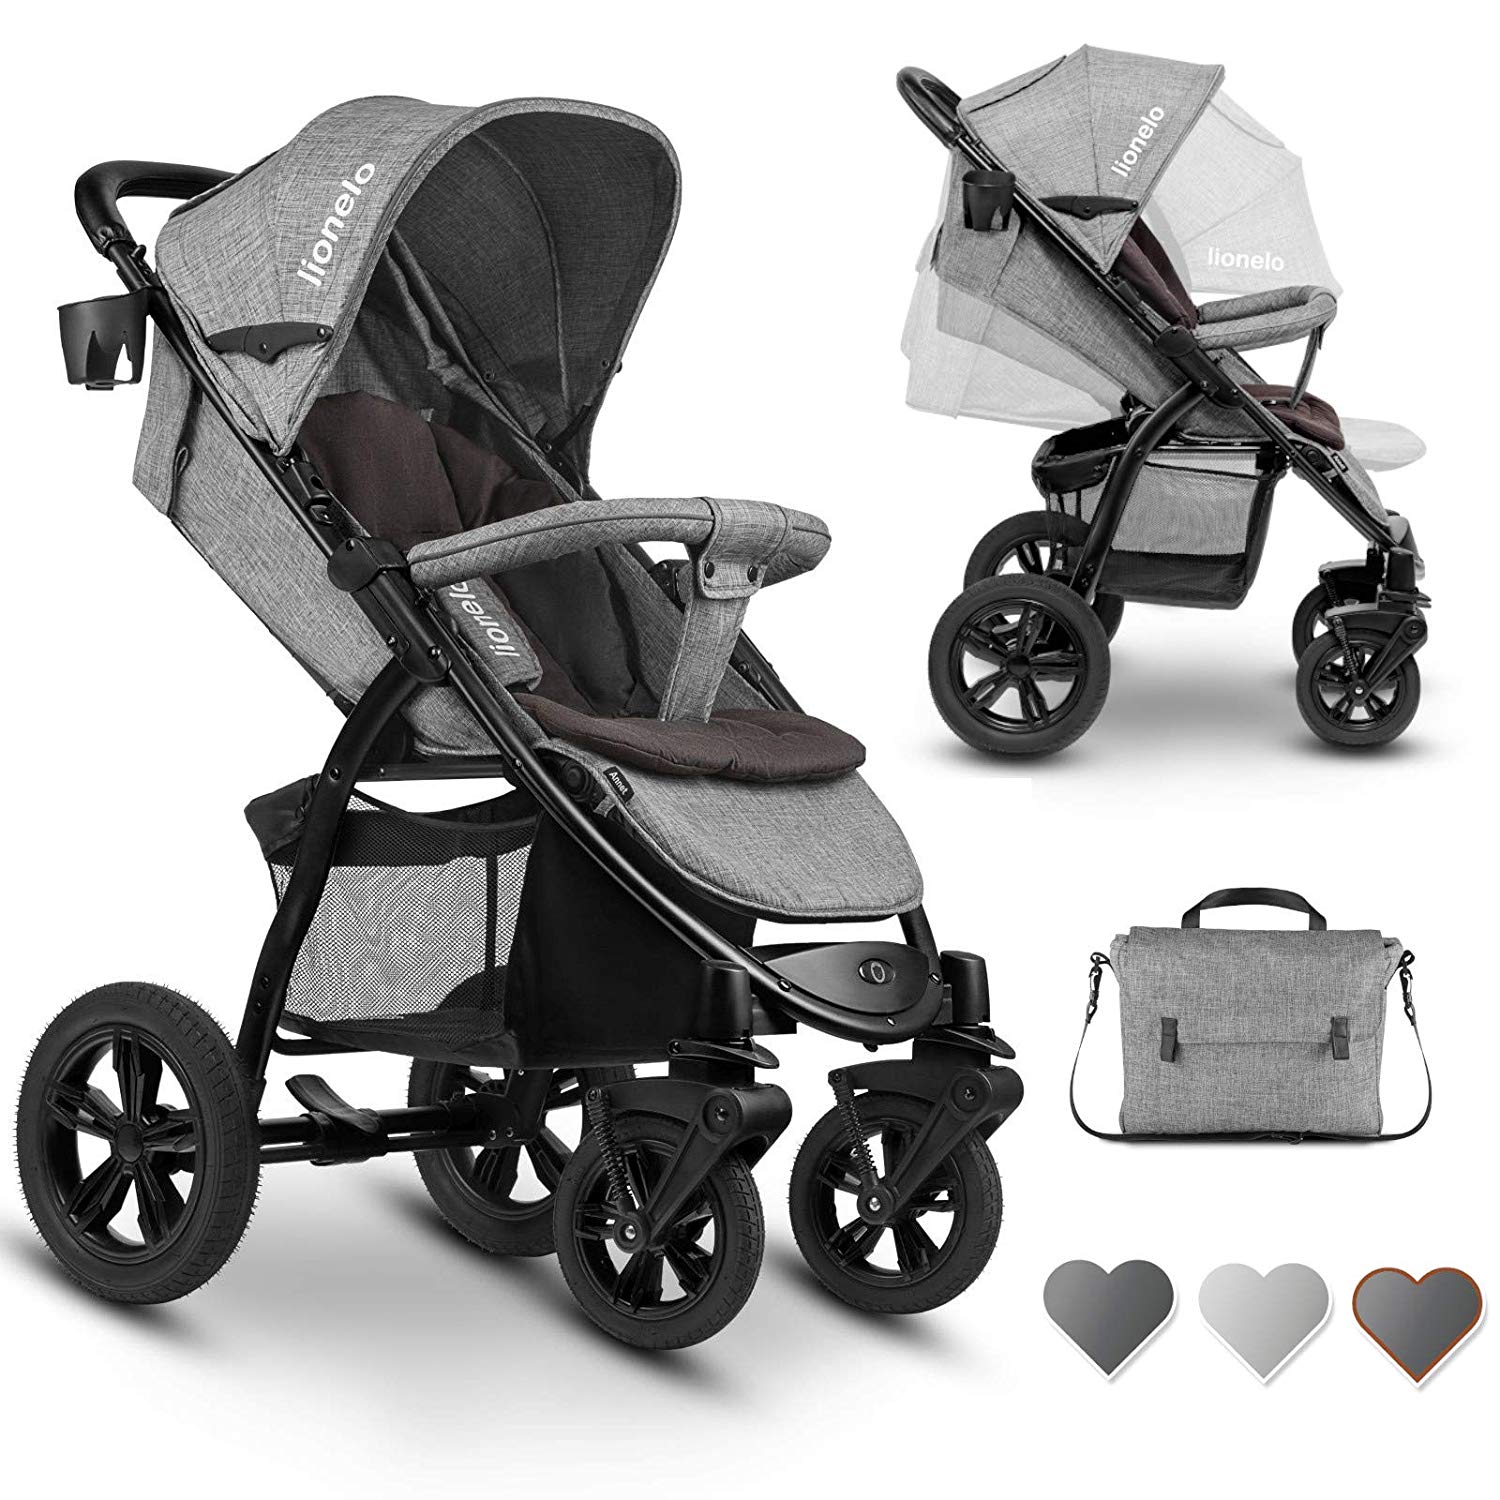 Lionelo Annet Tour Buggy with Reclining Position - Small Foldable Pushchair with Seat Cushion and Parents’ Bag - Solid Rubber Wheels - Mosquito Net - Drink Holder - Shopping Basket betonfarben